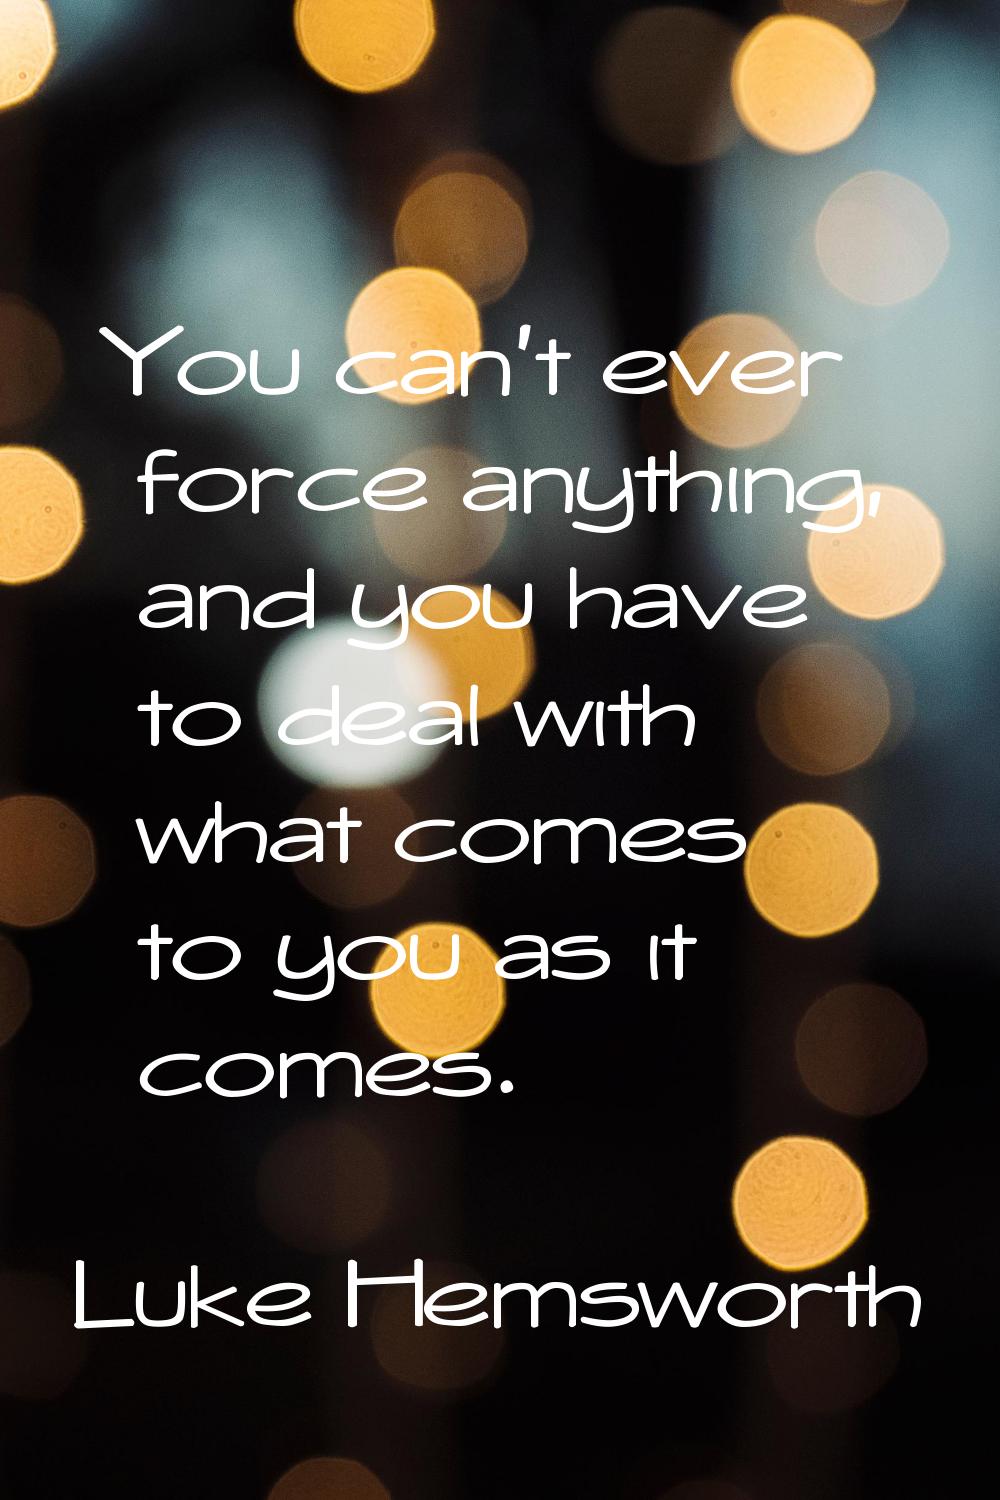 You can't ever force anything, and you have to deal with what comes to you as it comes.